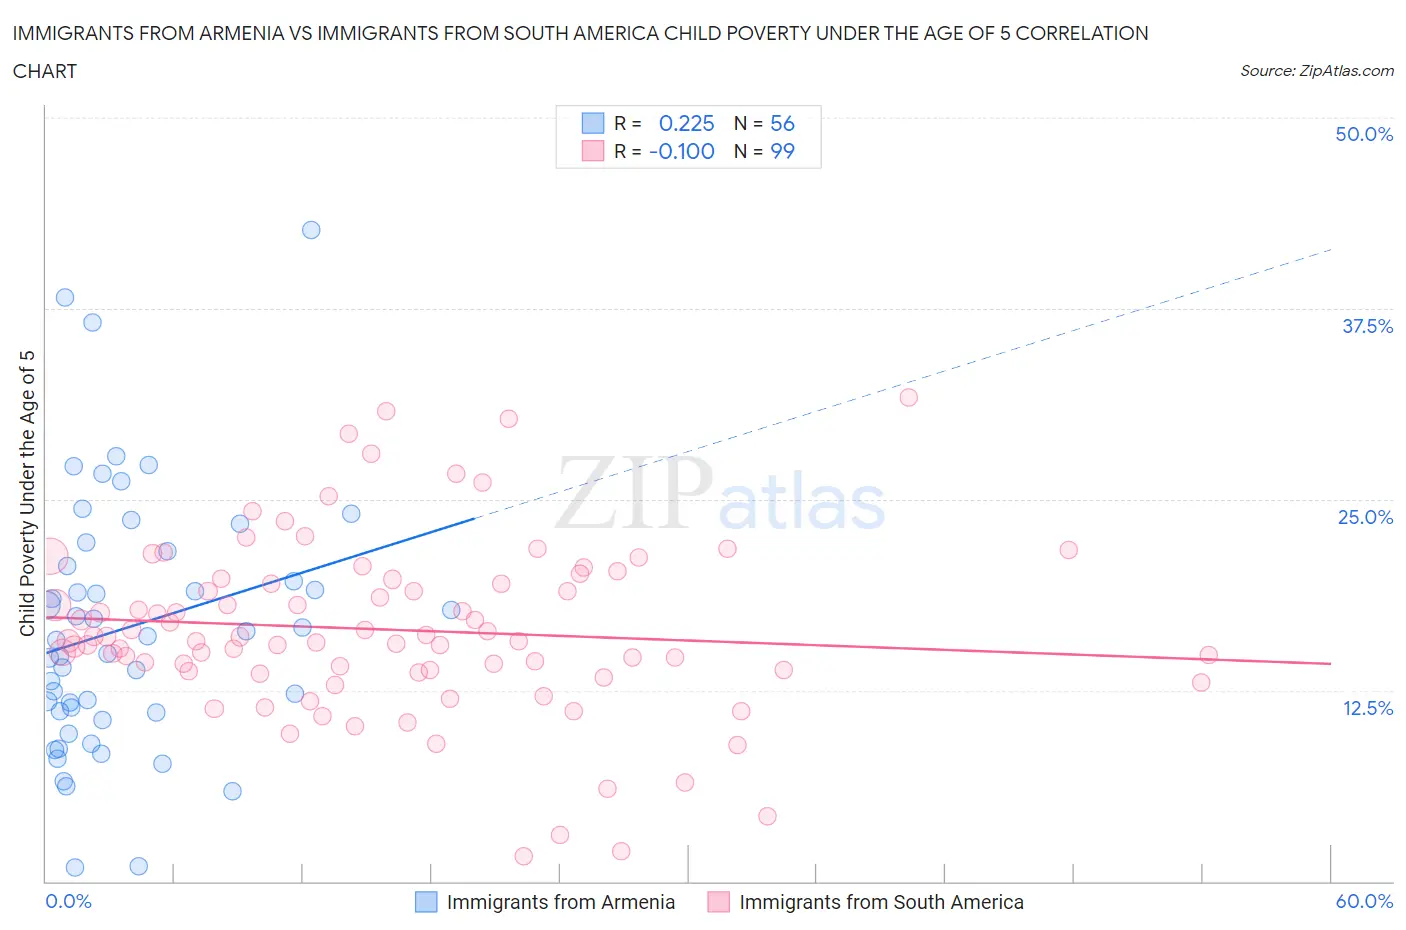 Immigrants from Armenia vs Immigrants from South America Child Poverty Under the Age of 5